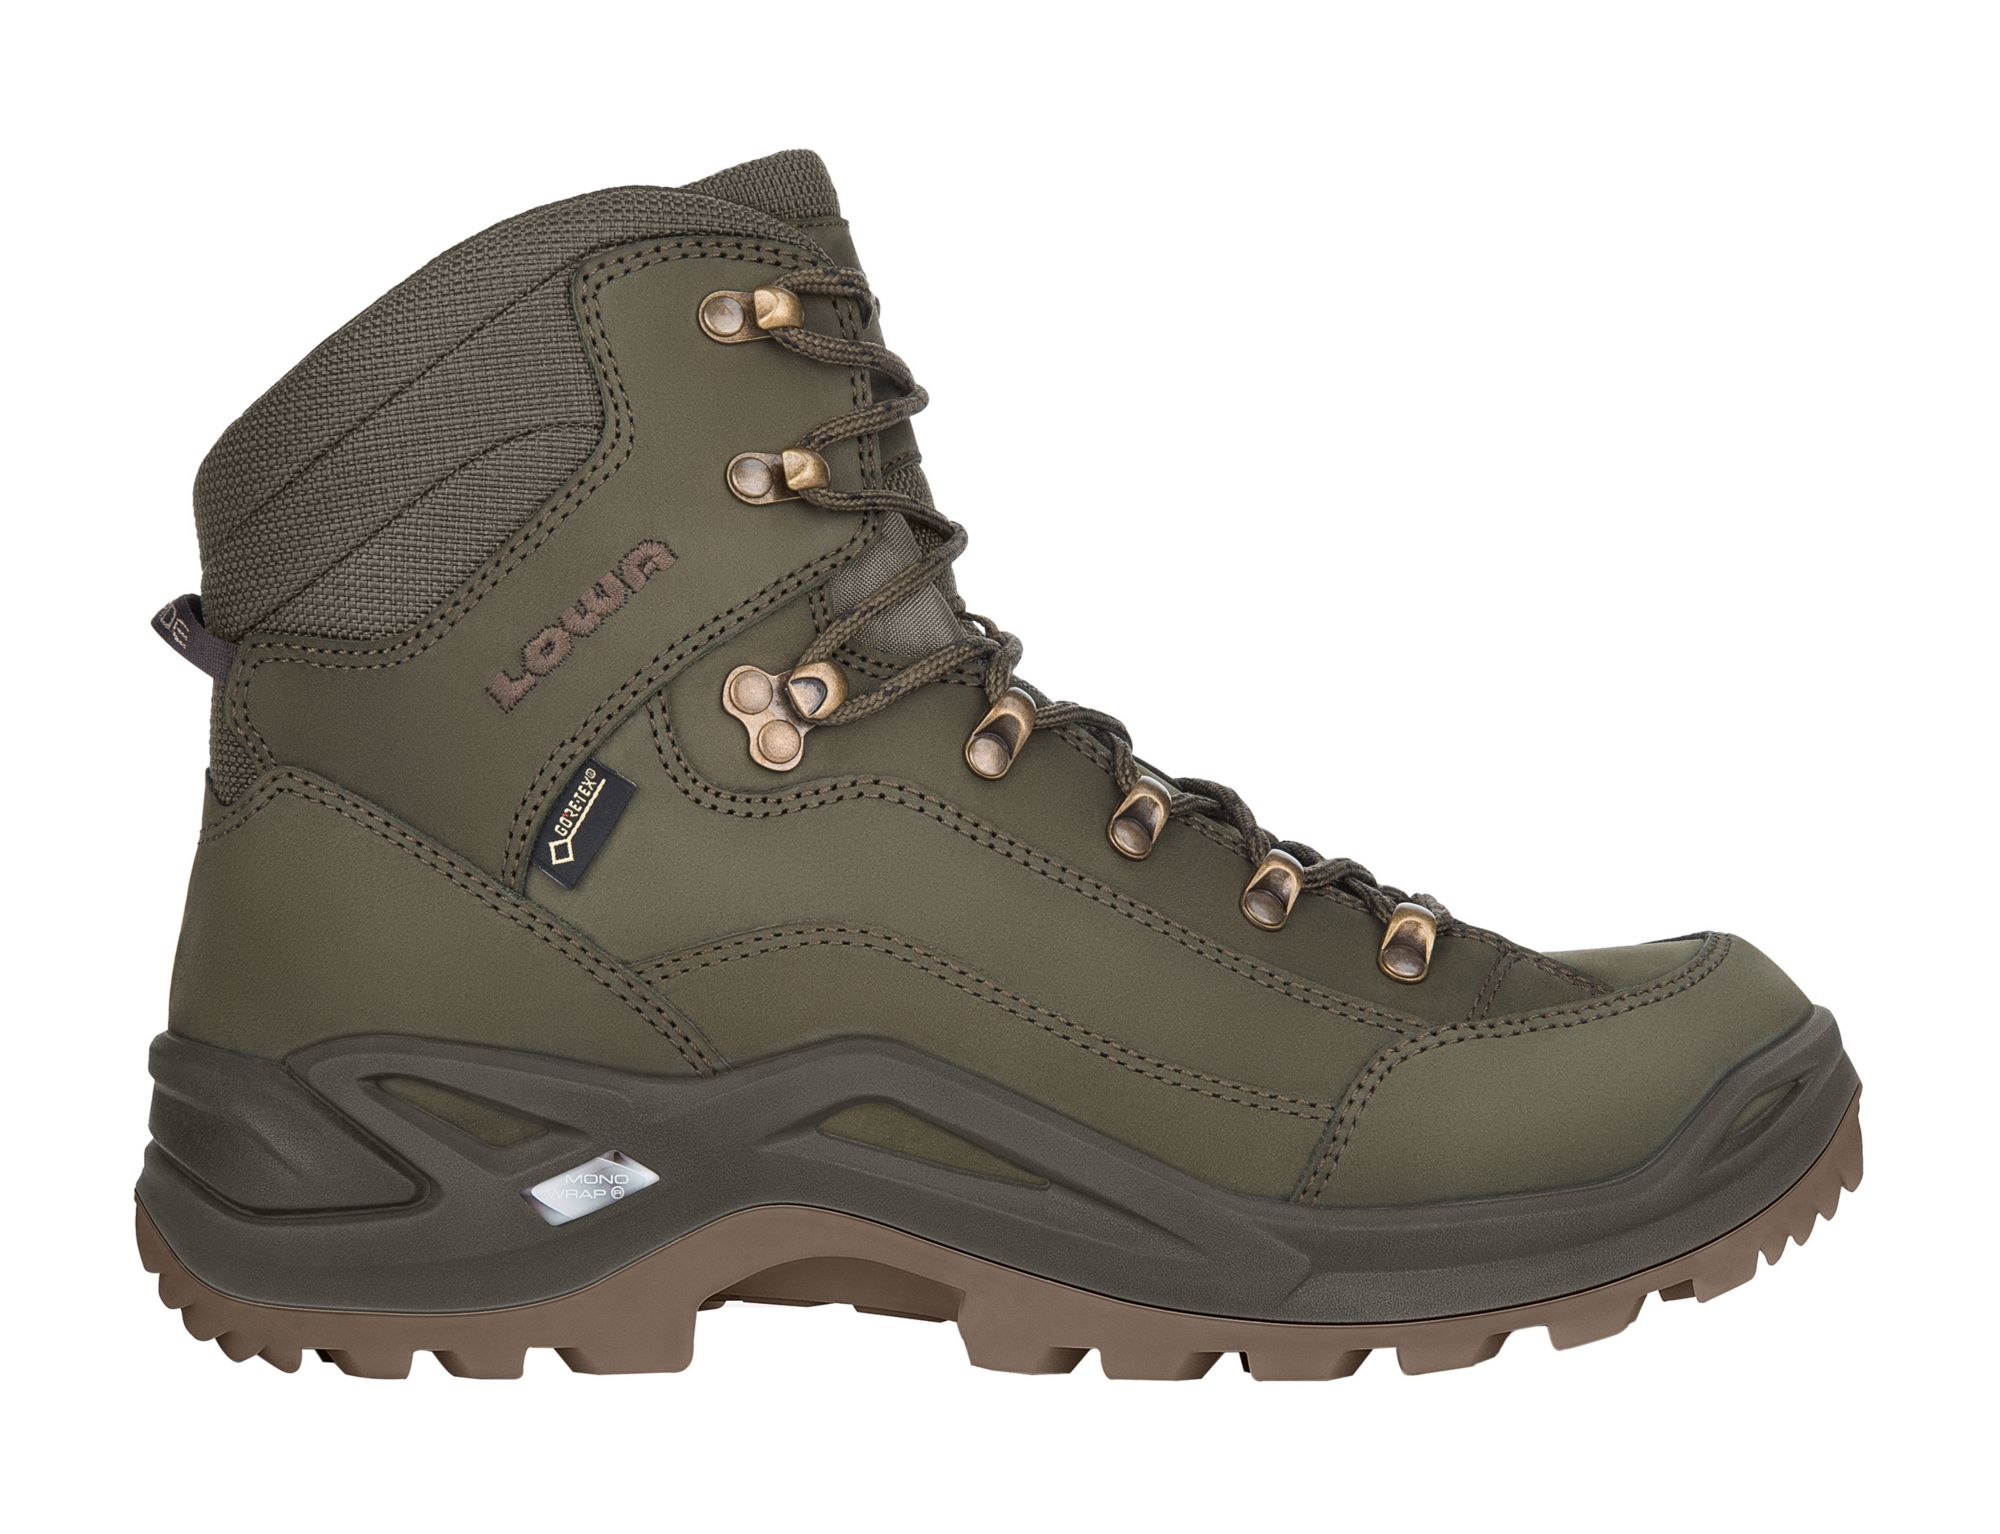 Photos - Trekking Shoes LOWA Men's Renegade GTX Mid Boots, Size 8.5, Basil | Father's Day Gift Ide 